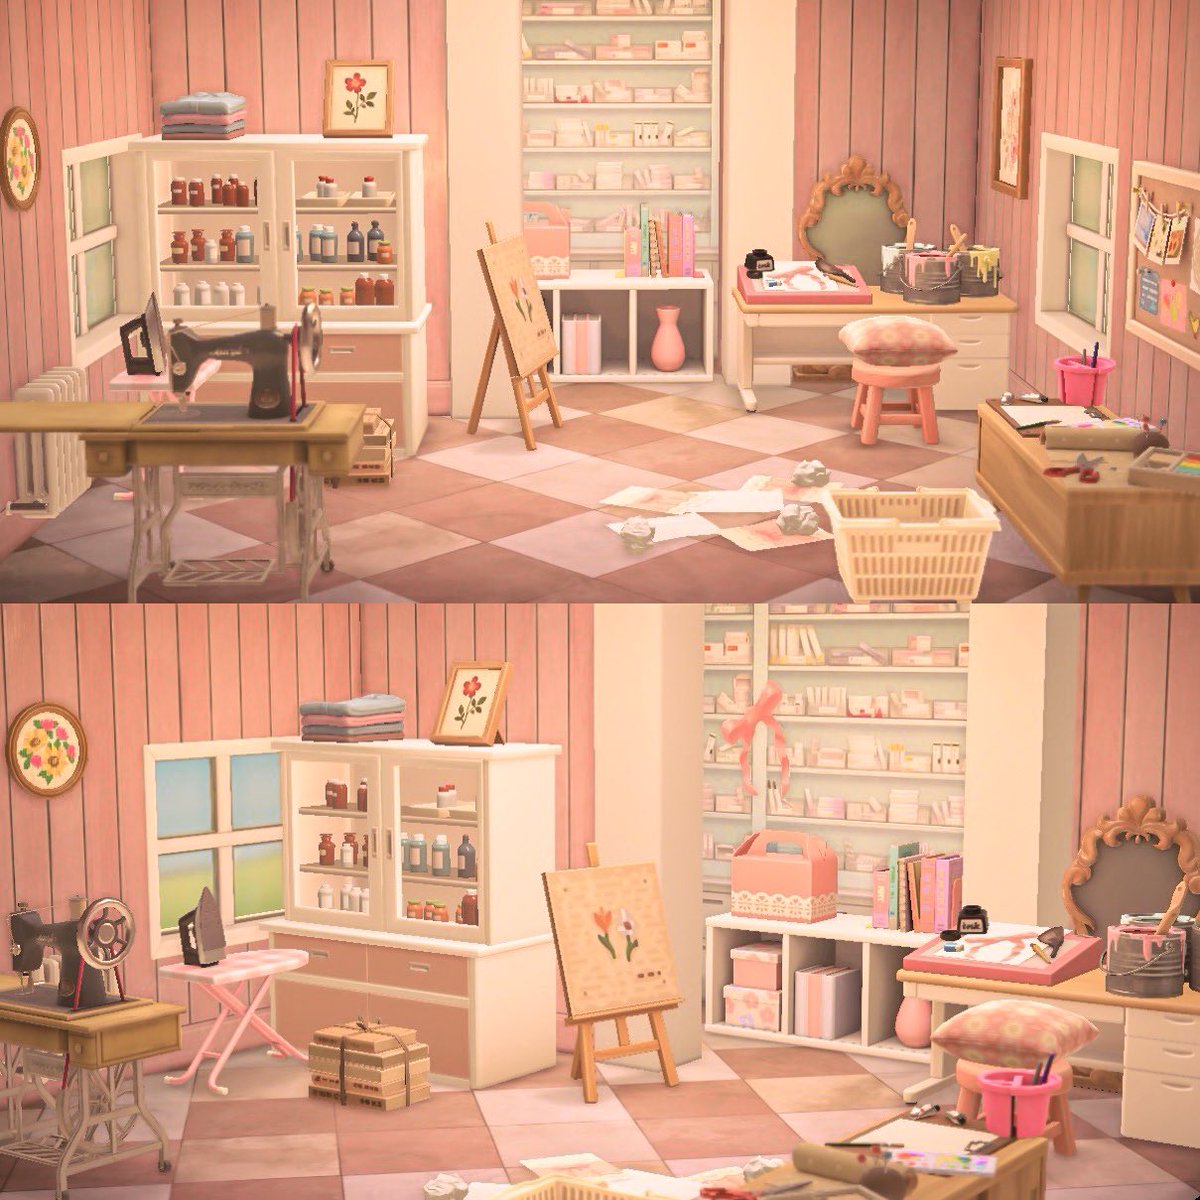 the craft room of my dreams 
🎨💭🎀🧶🌷
#acnh #animalcrossing